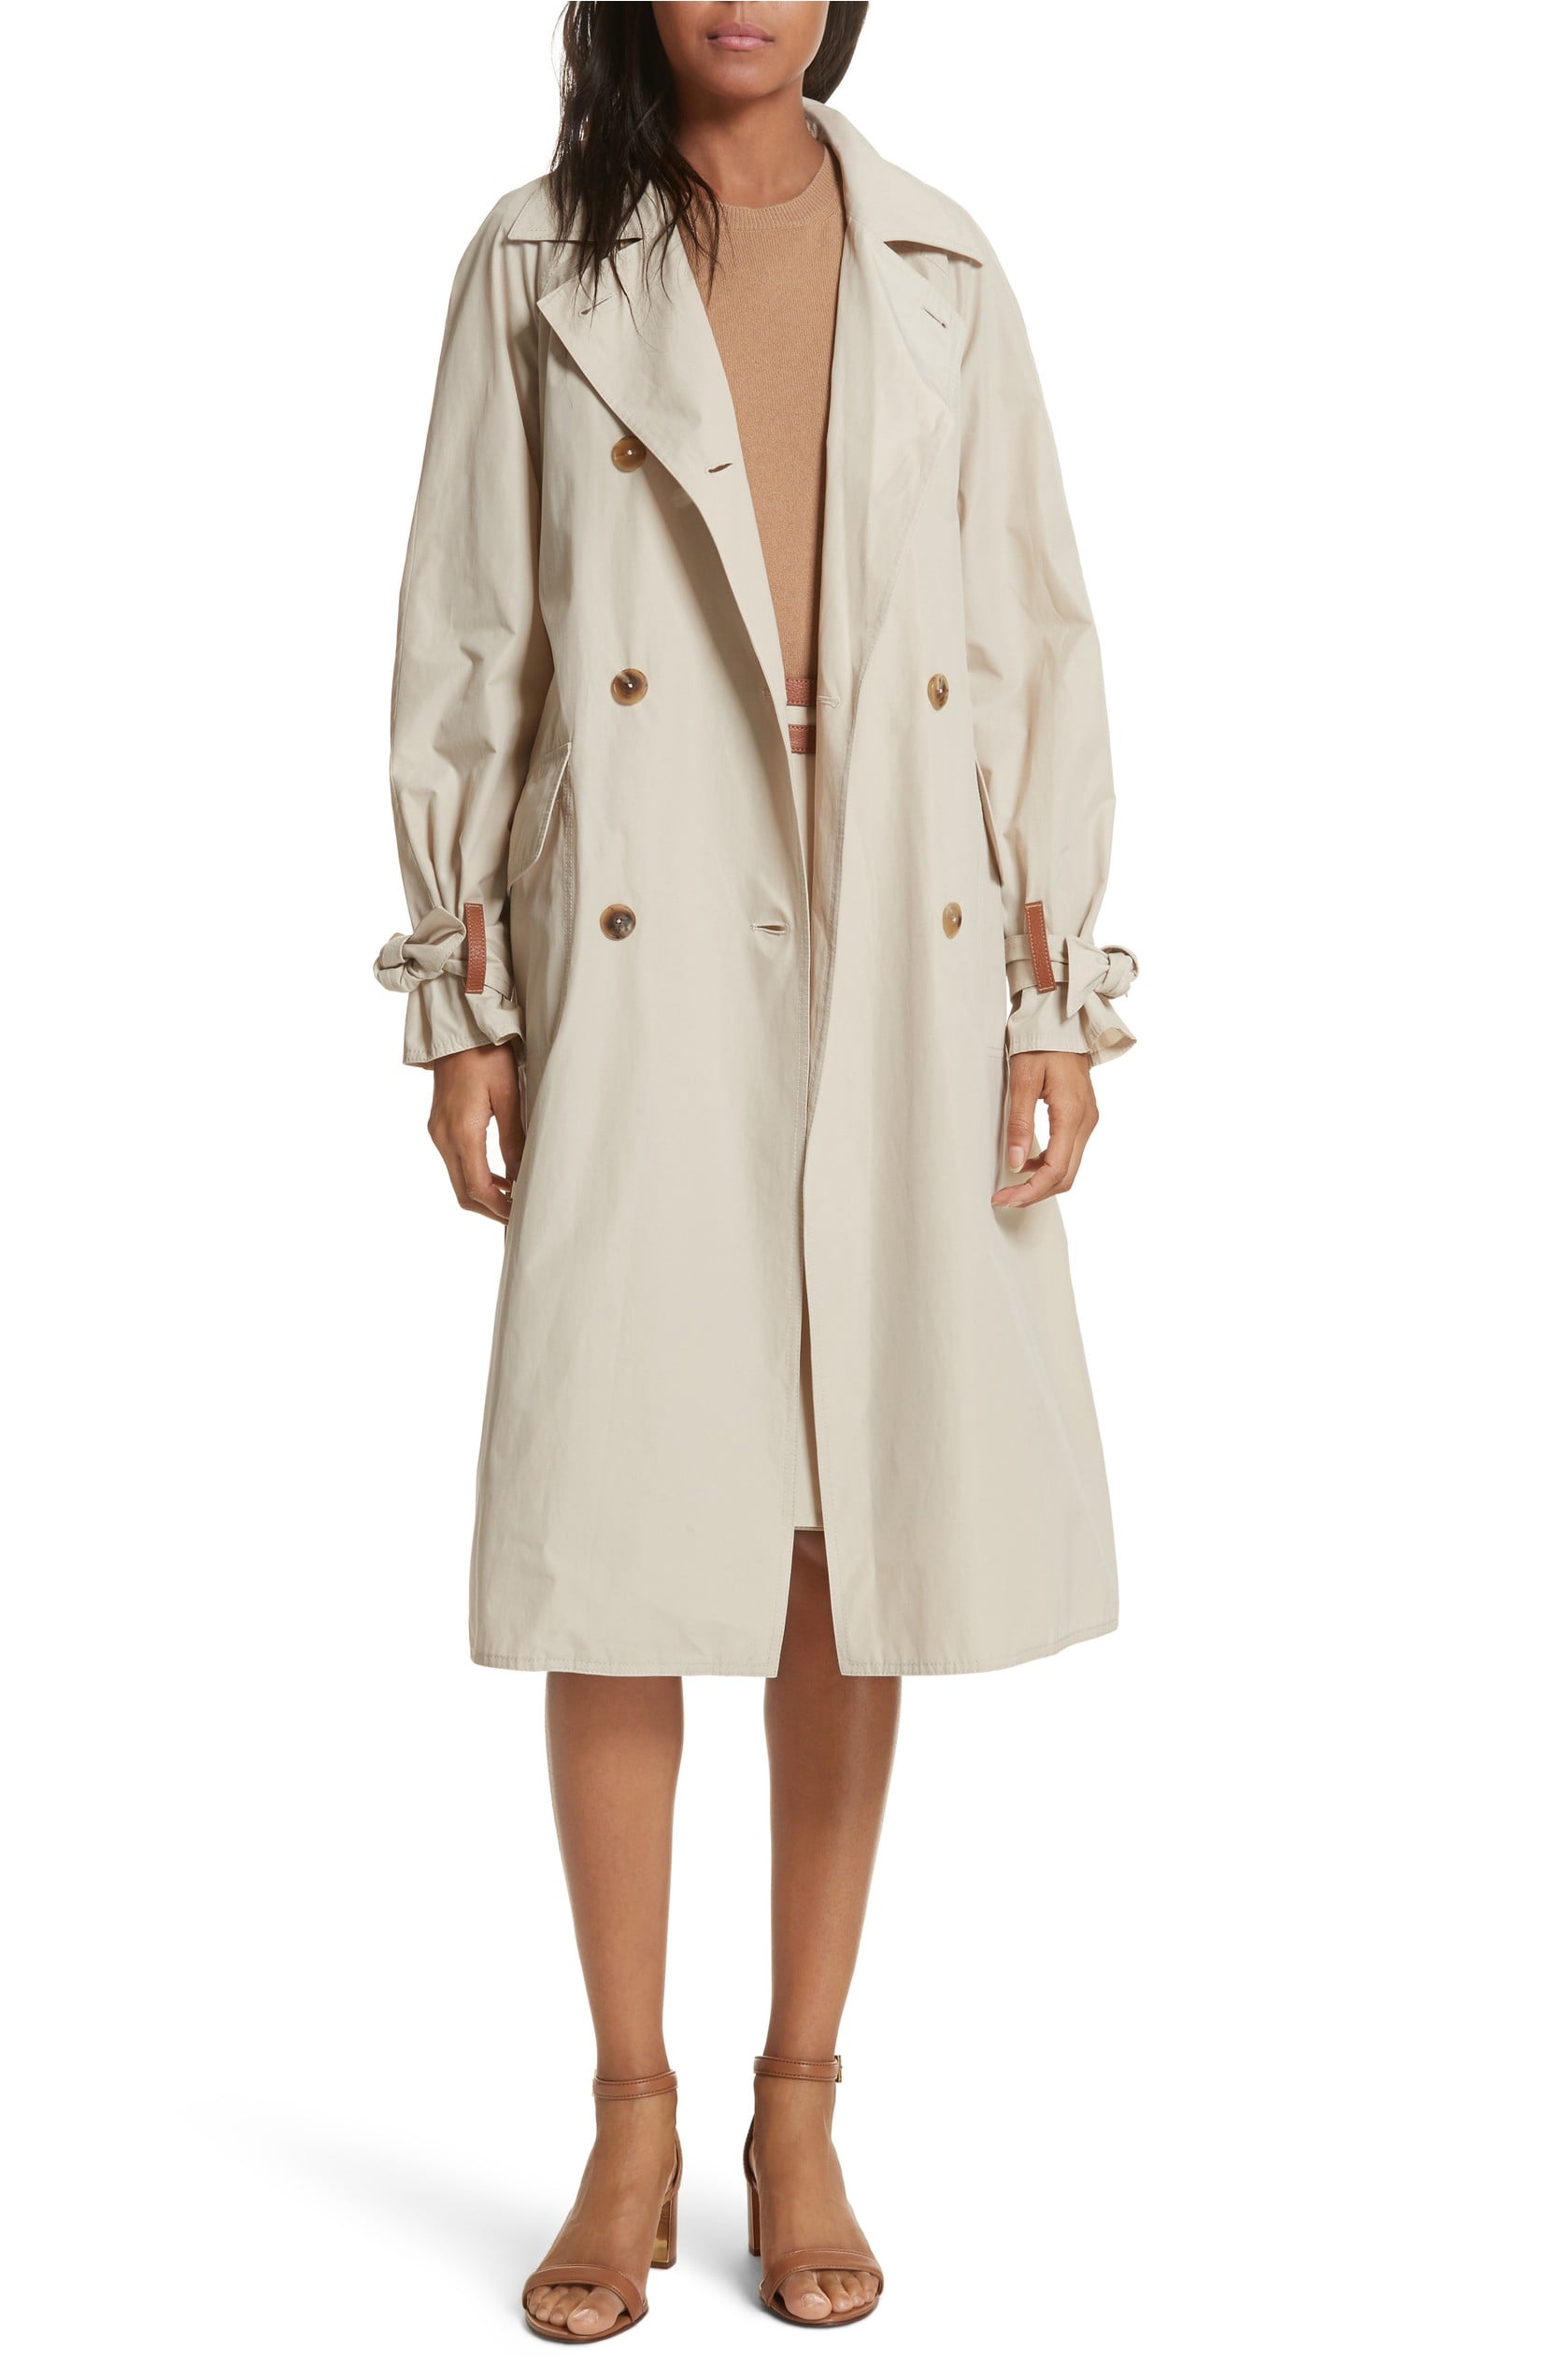 Tory Burch Marielle Leather Trim Trench Coat | Victoria Beckham's Outfit Is  So Good, It Has Us Secretly Wishing For Colder Weather | POPSUGAR Fashion  Photo 10